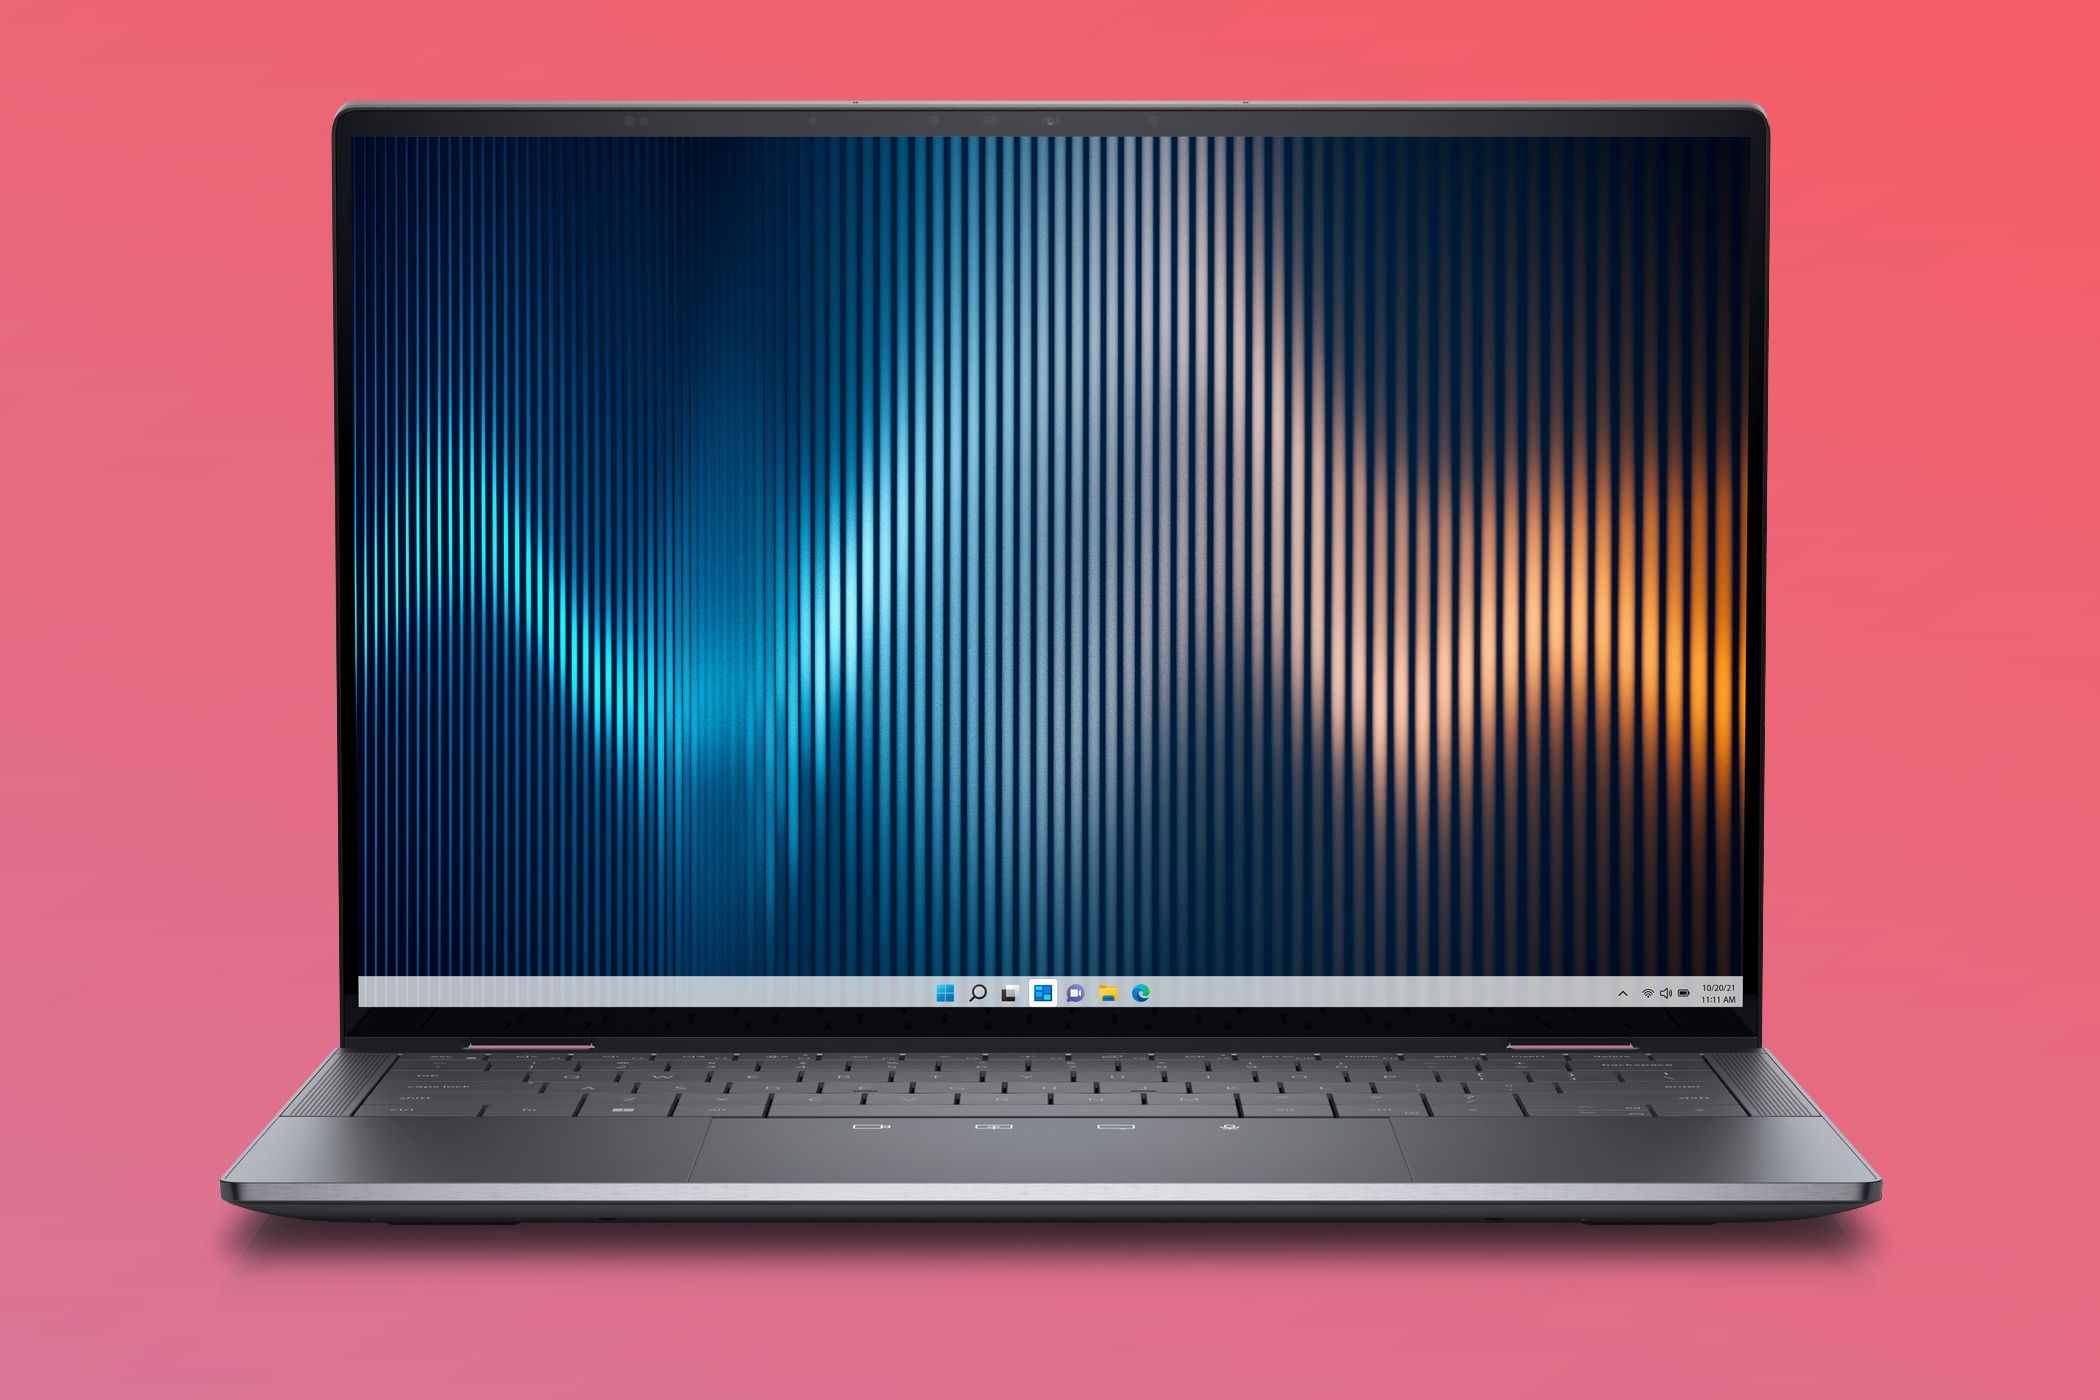 Front view of the Dell Latitude 9440 over a red gradient background